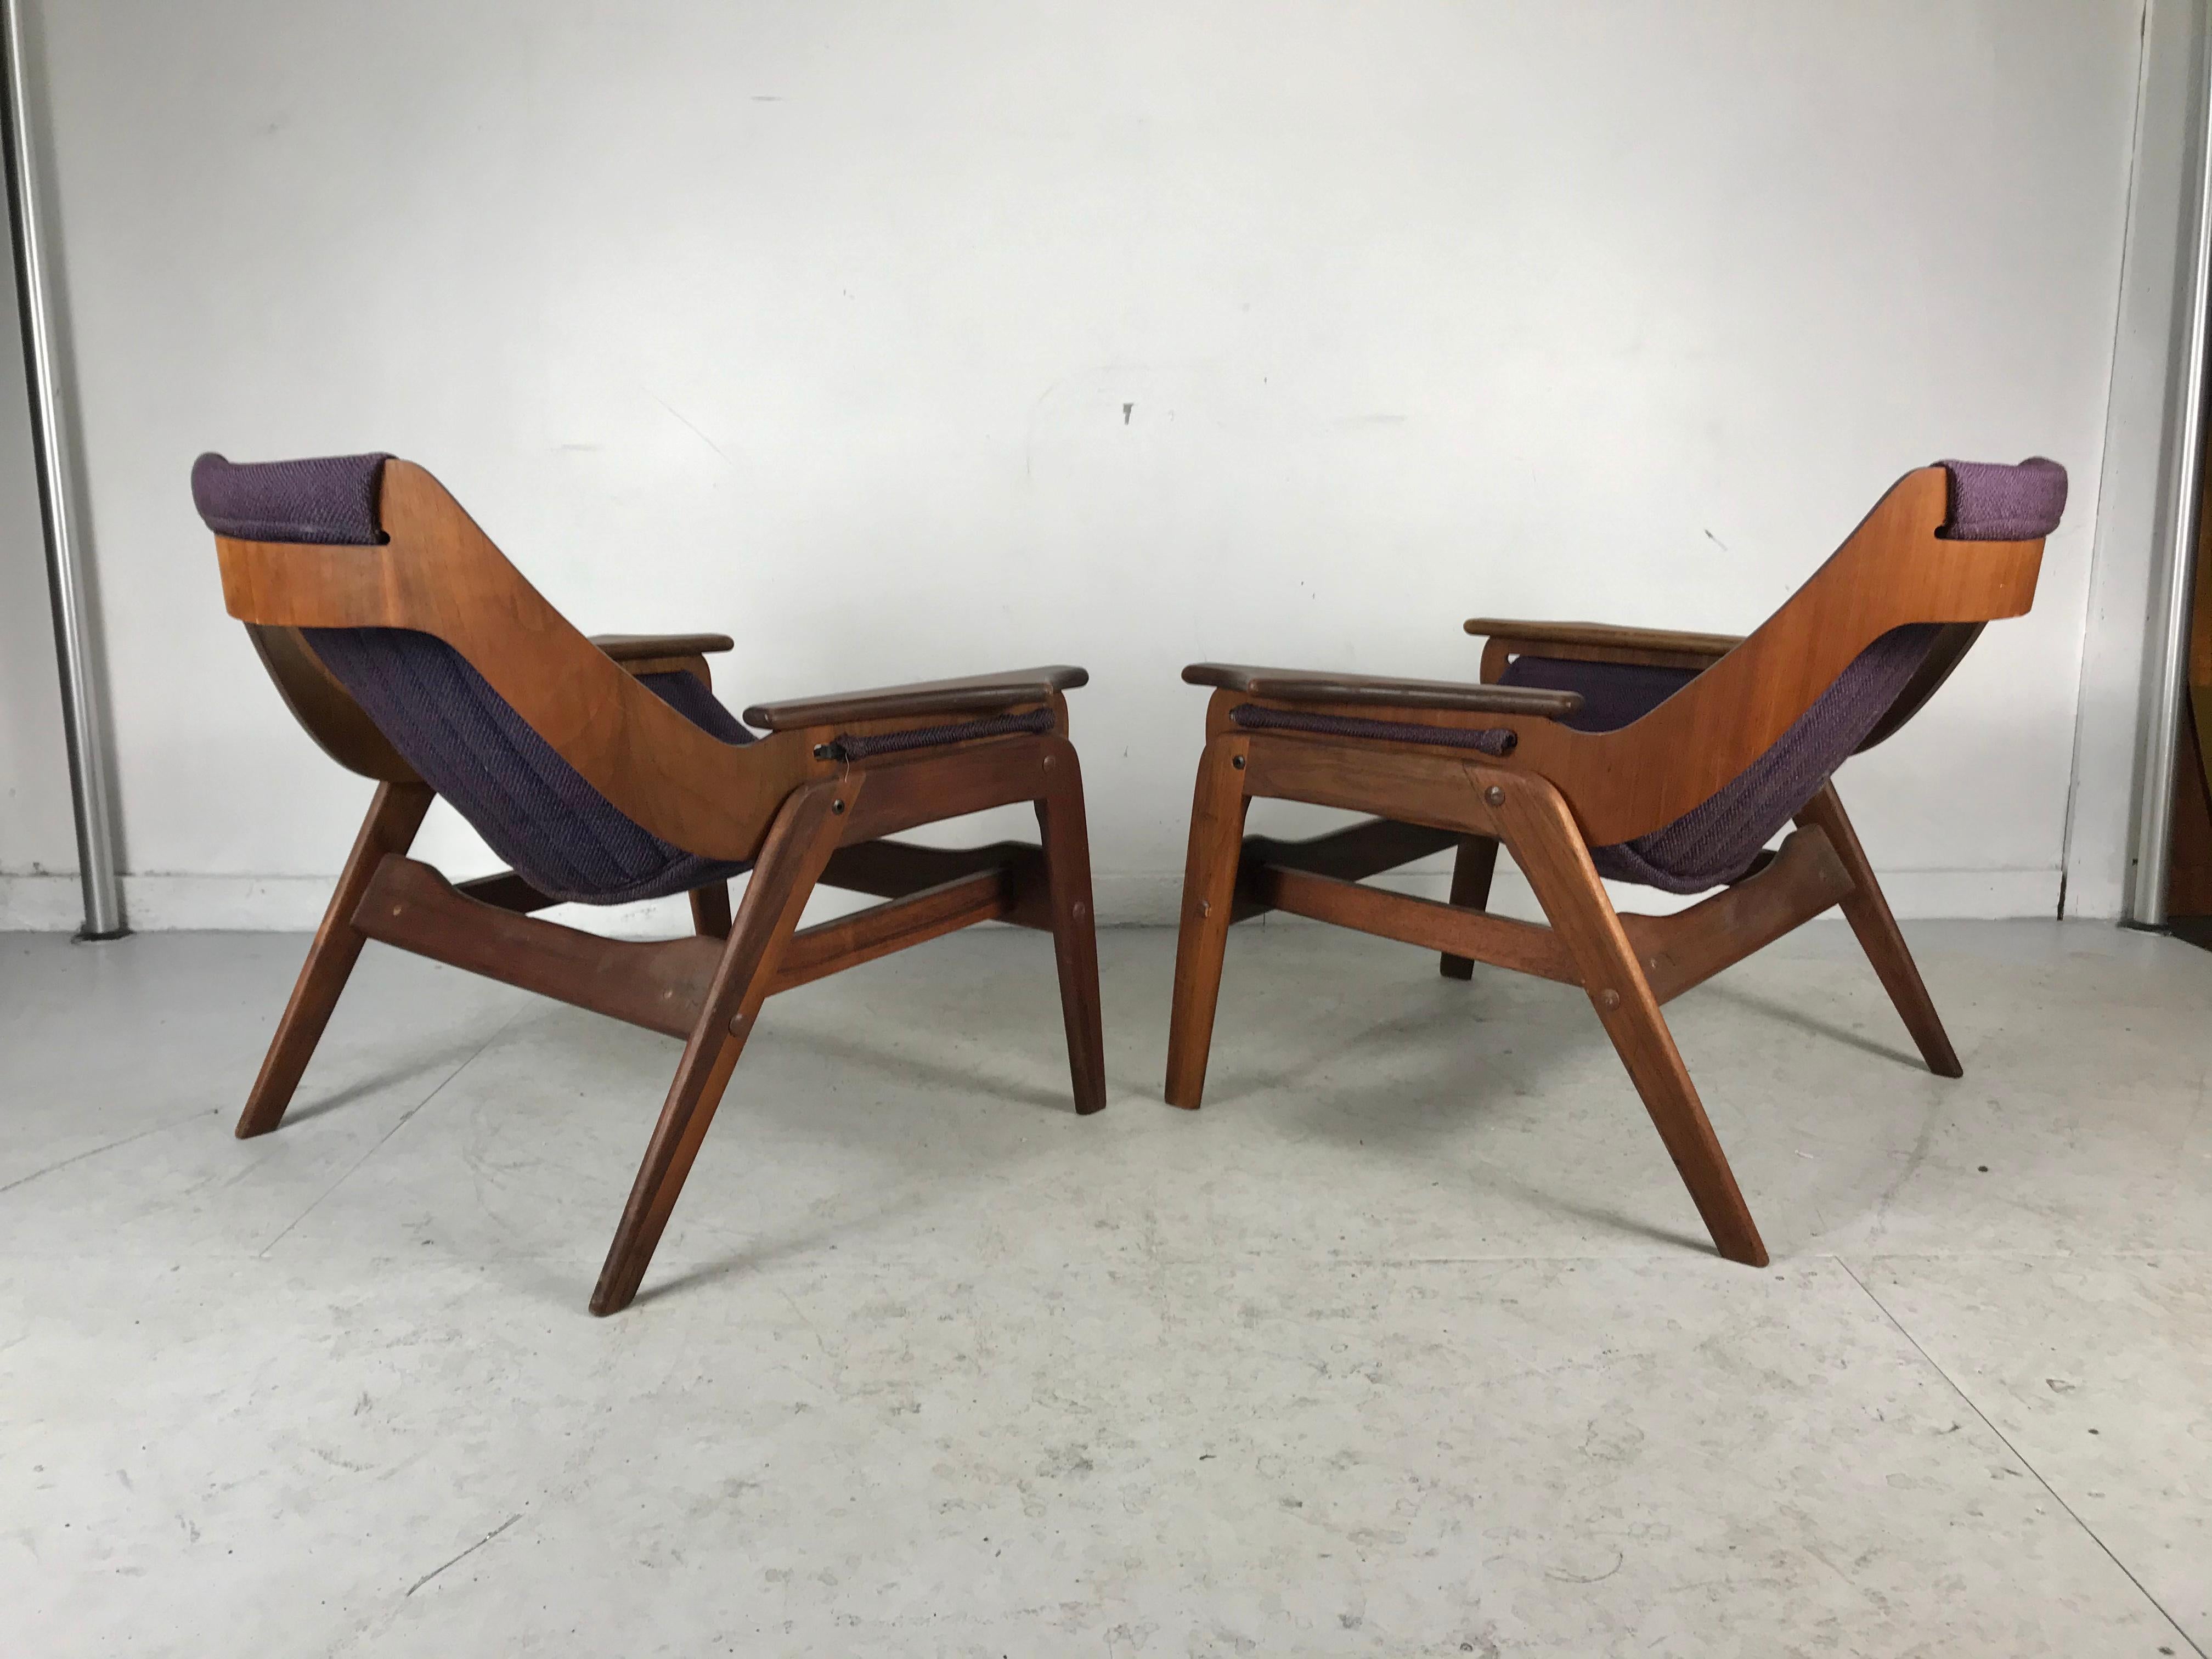 Classic dramatic pair of sculptural Modernist sling chairs designed by Jerry Johnson for Charlton. Trimph 1.... Nice vintage condition., retain original slings. Minor tearing to fronts, age appropriate wear. In-house restoration avail. Inquire?